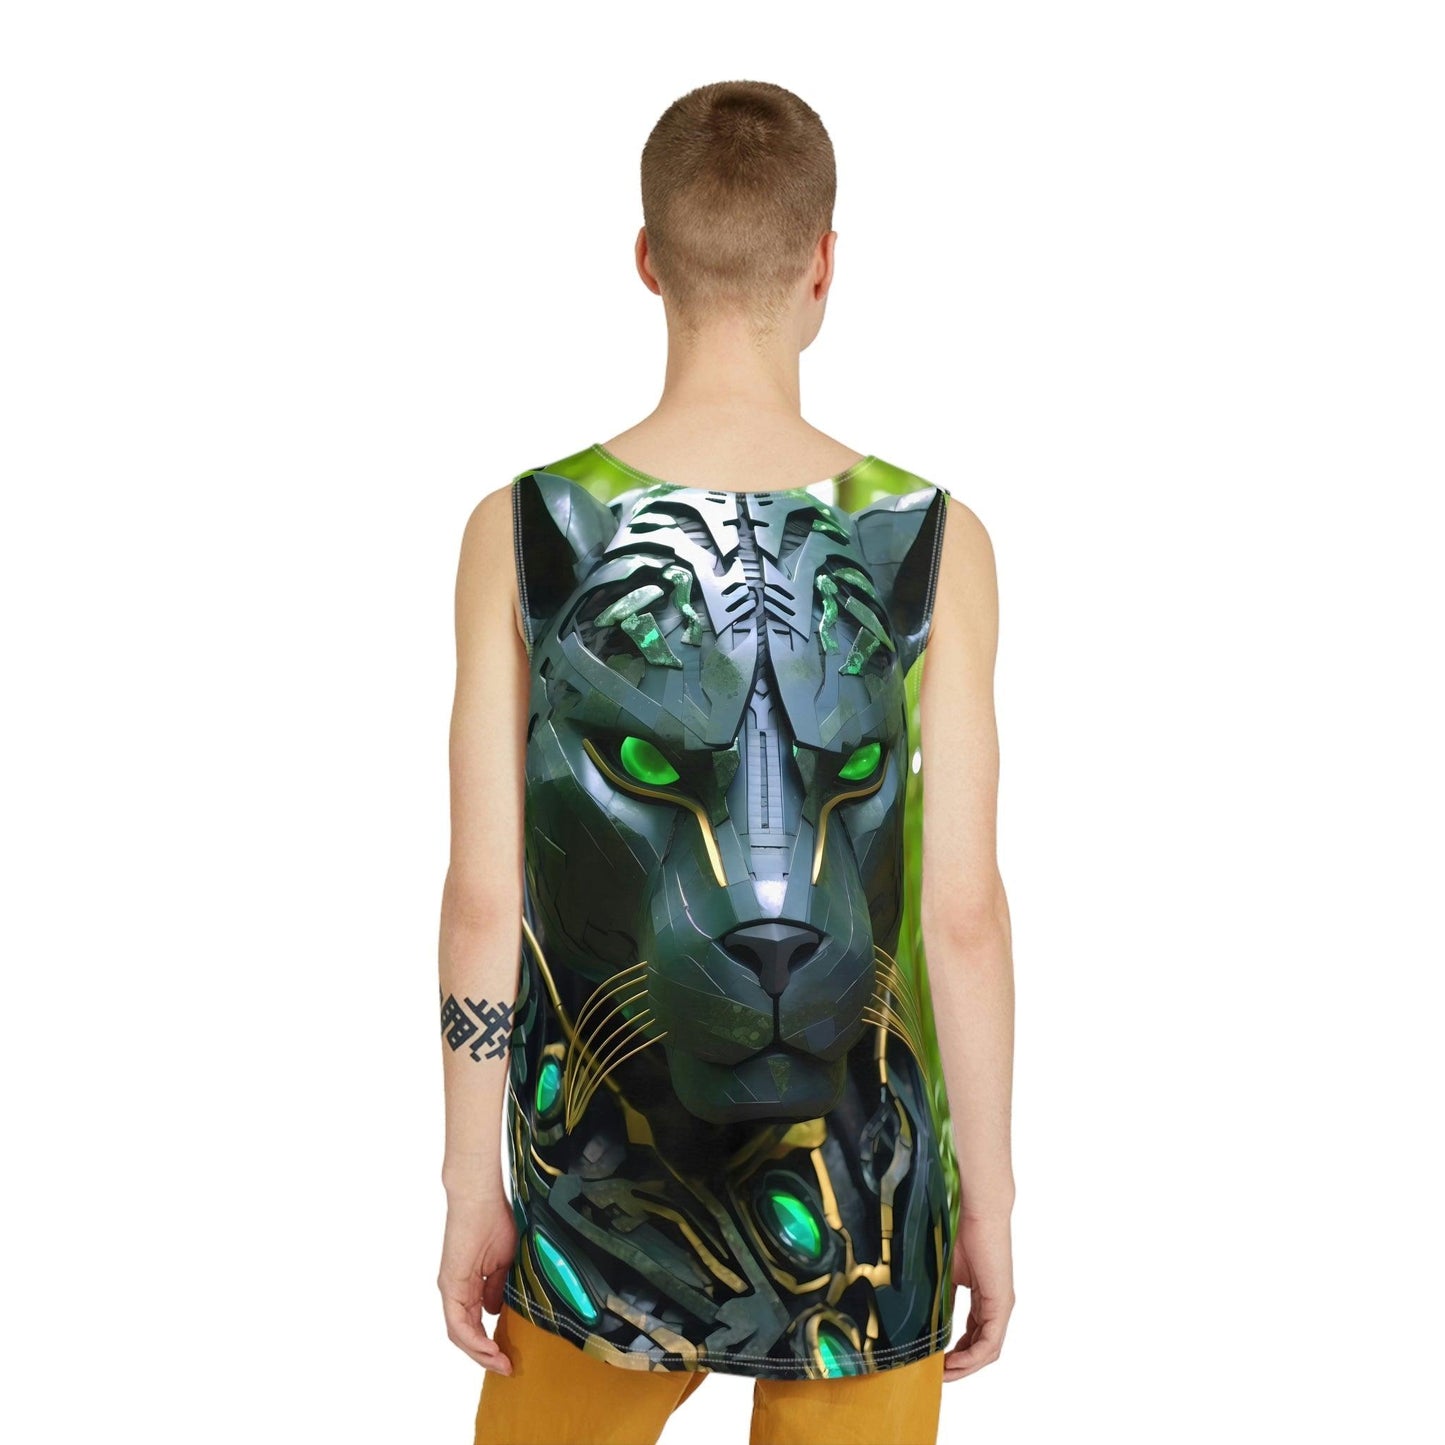 Obsidian Black Panther Custom Sublimation Print All-Over Design Tank Top - Stylish Comfort for Gym and Streetwear - Alchemystics.org